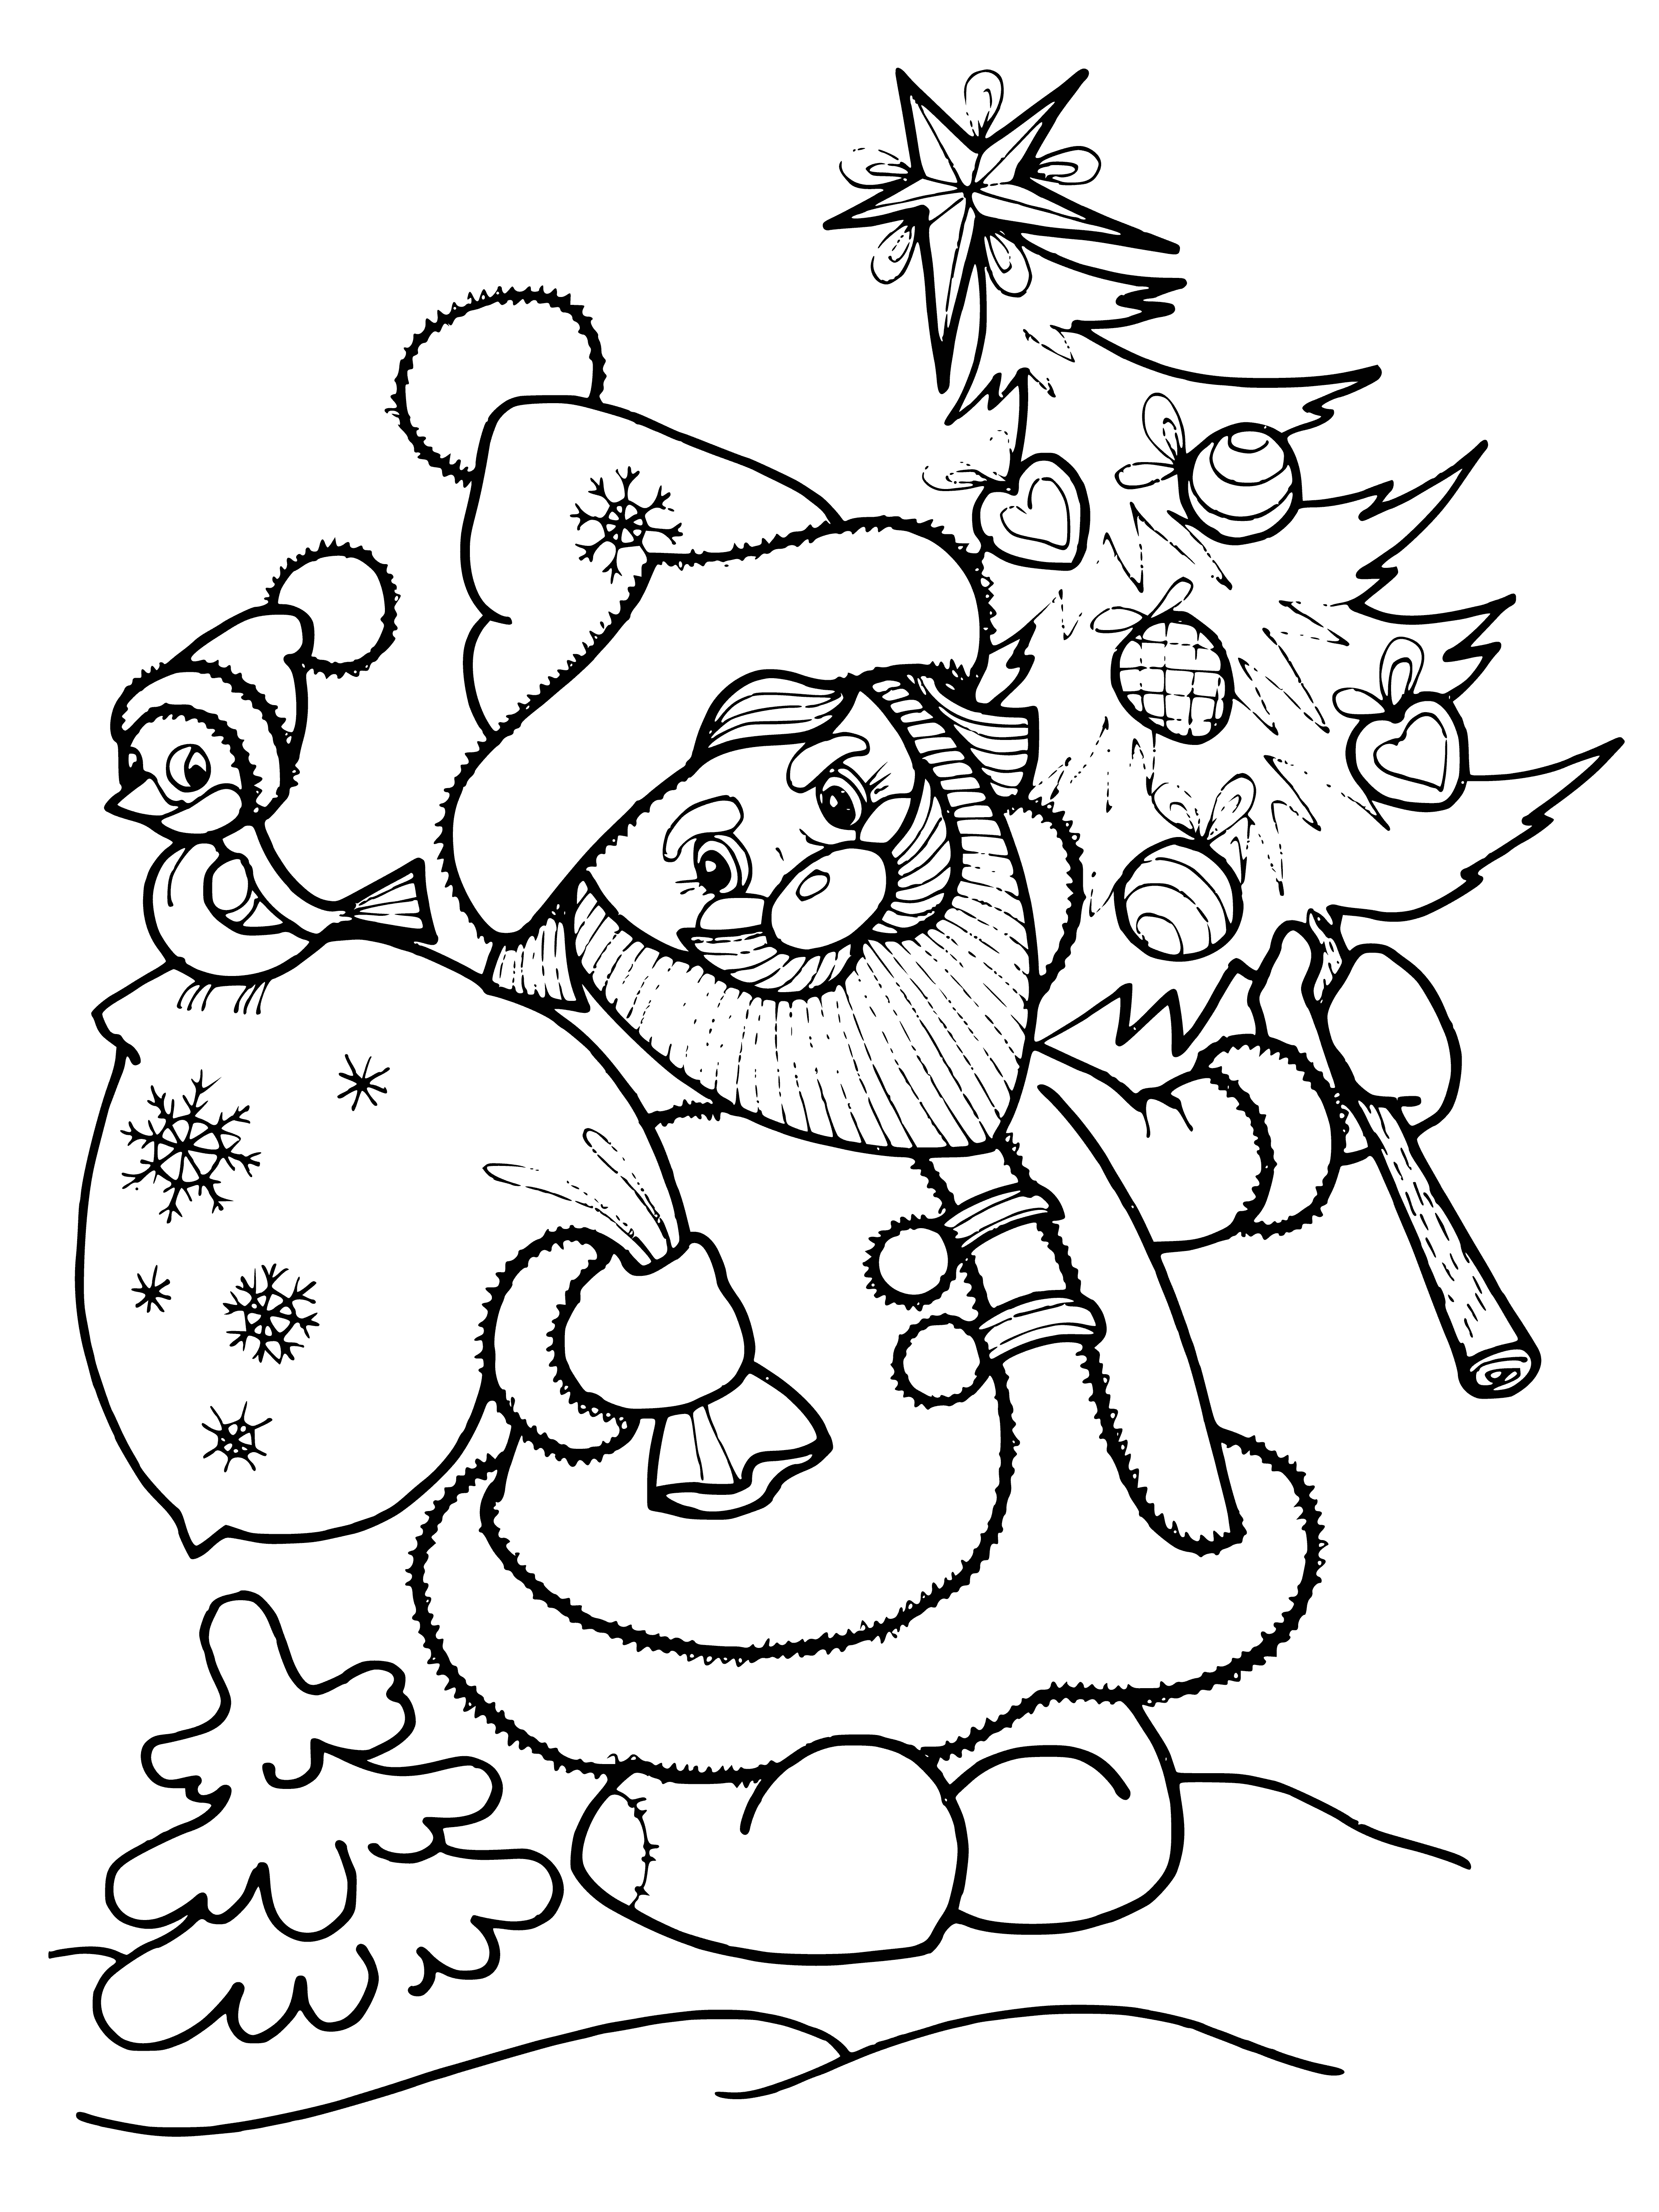 coloring page: #Santa

Santa in red suit w/ white fur trim standing by fireplace w/ stockings & presents. #ChristmasMagic